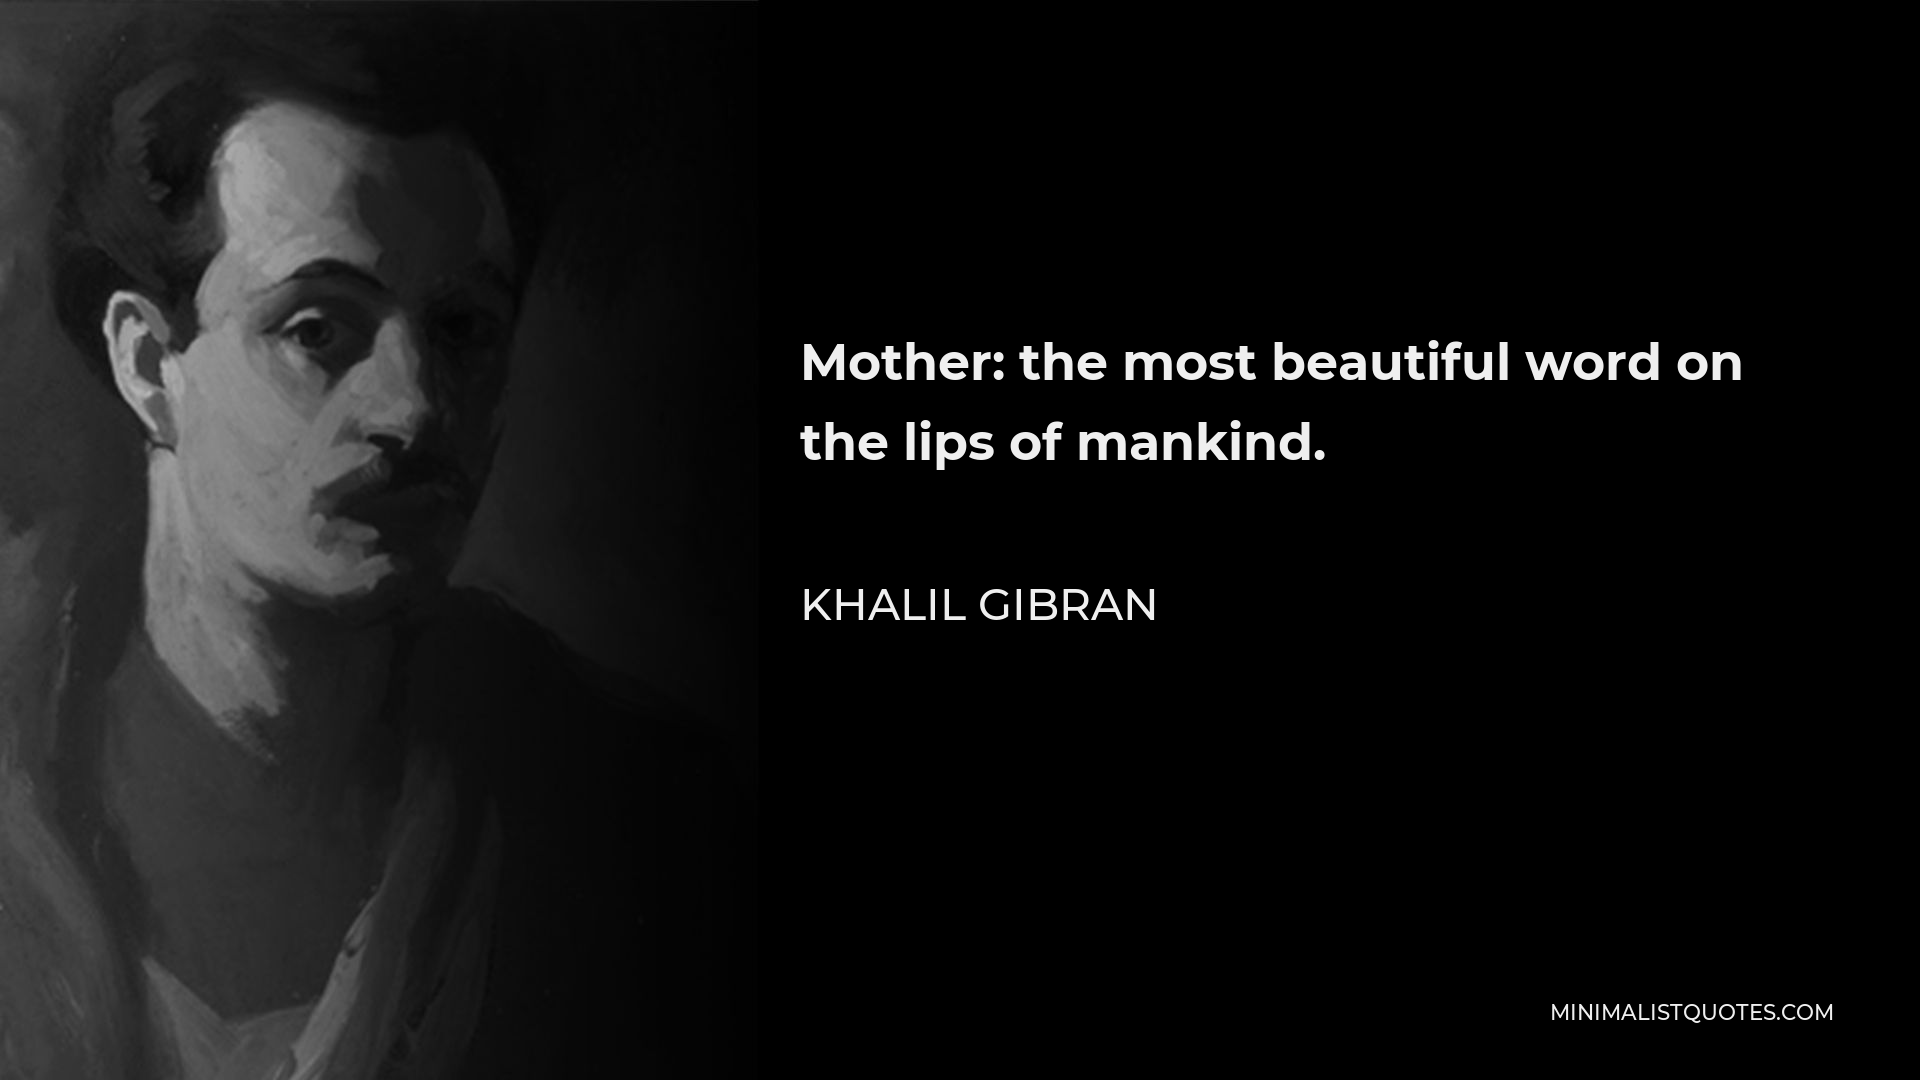 Khalil Gibran Quote - Mother: the most beautiful word on the lips of mankind.